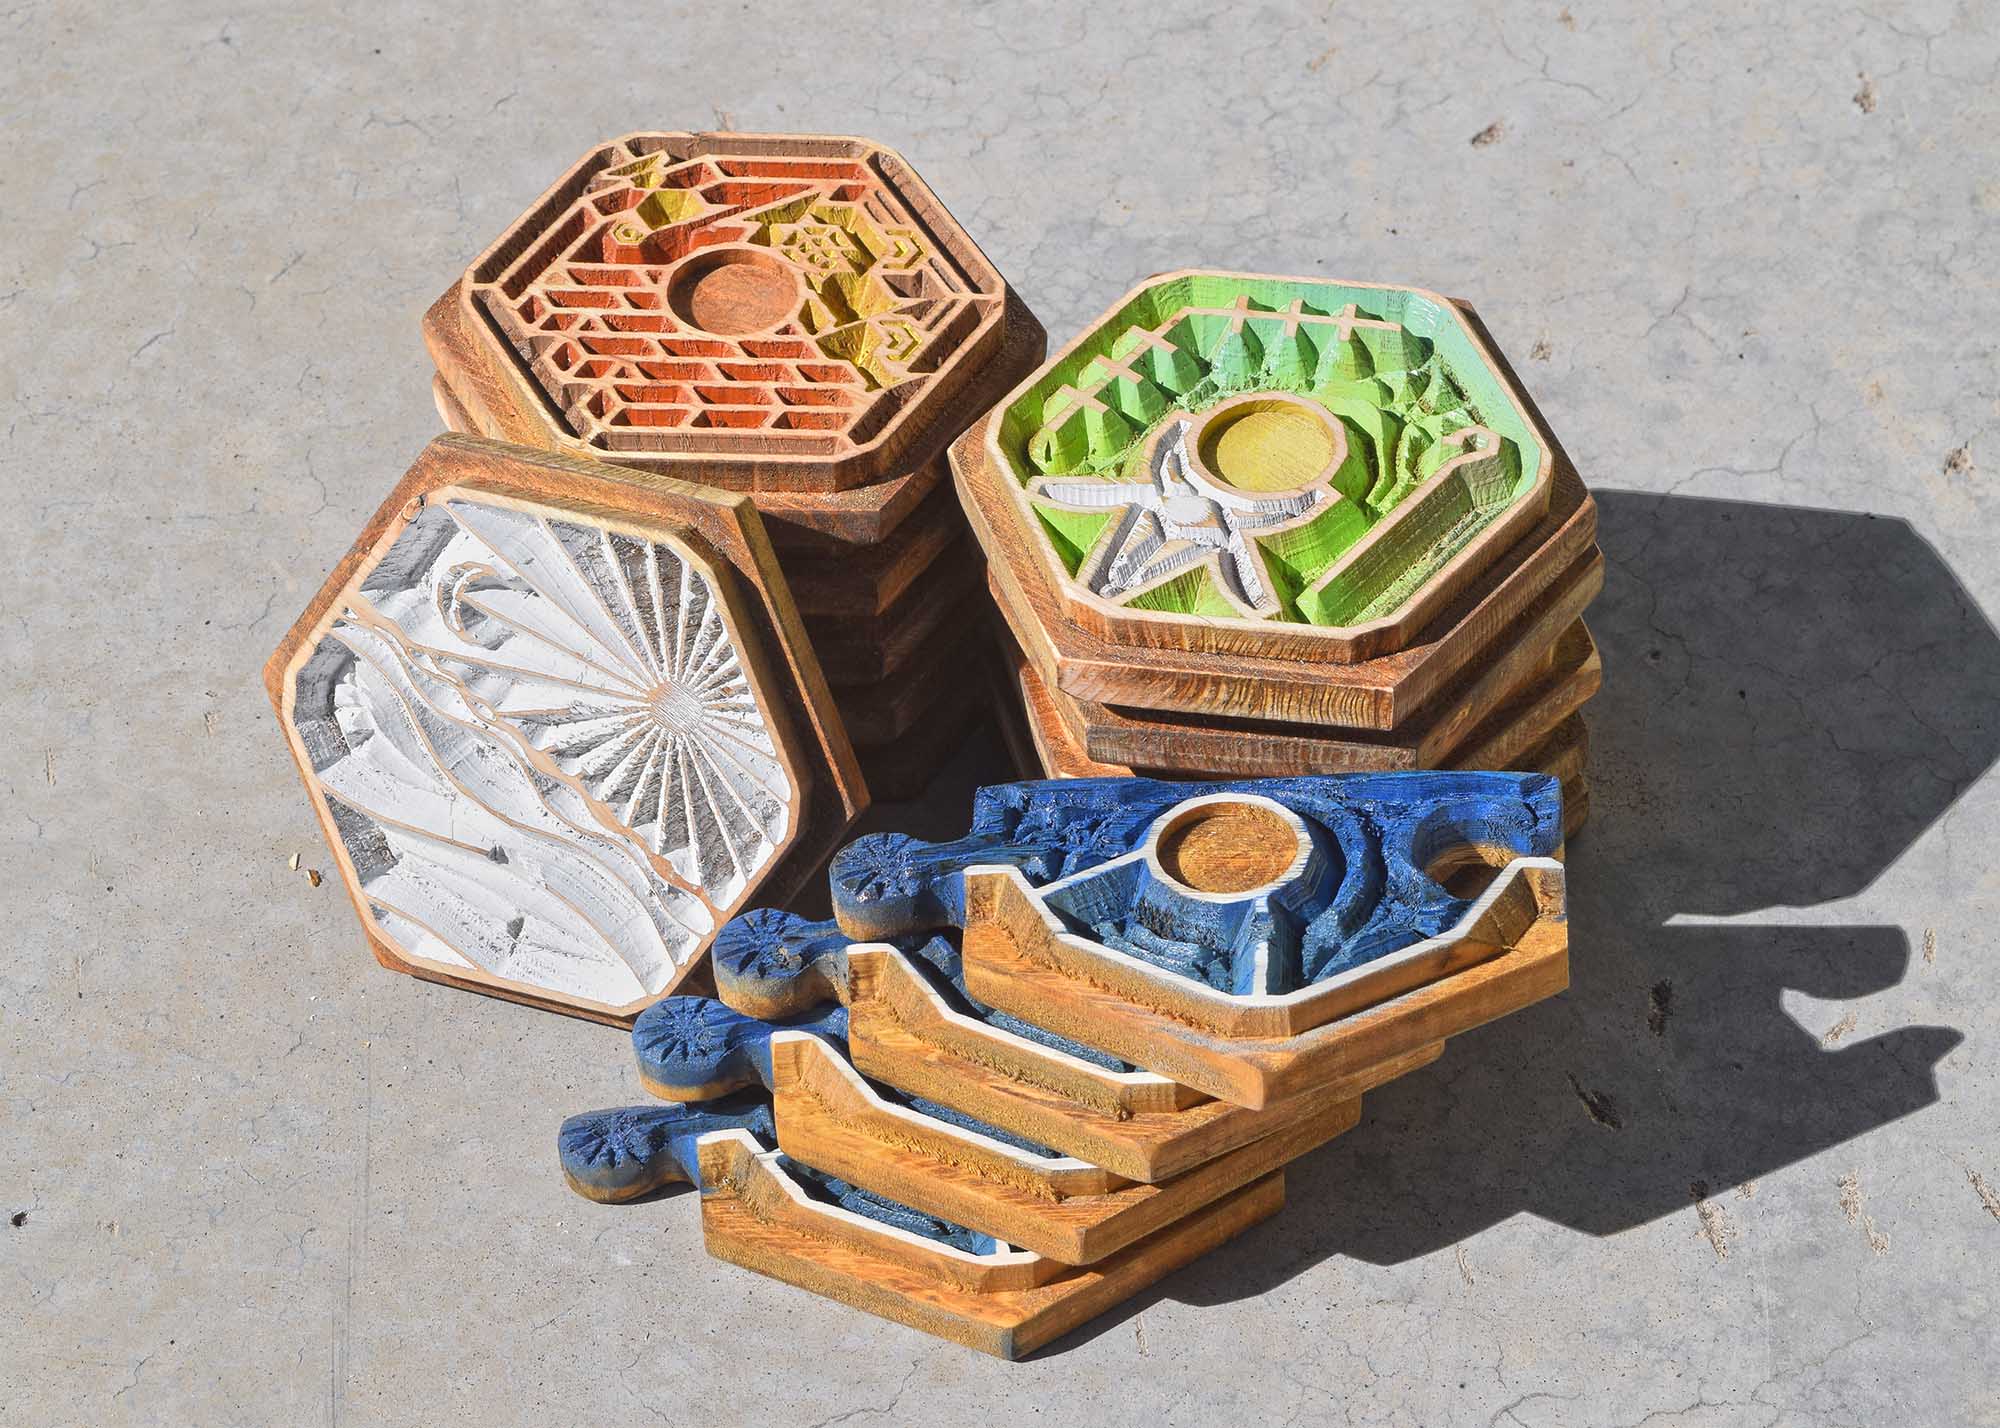 Settlers of Catan Wooden Game Board Set –